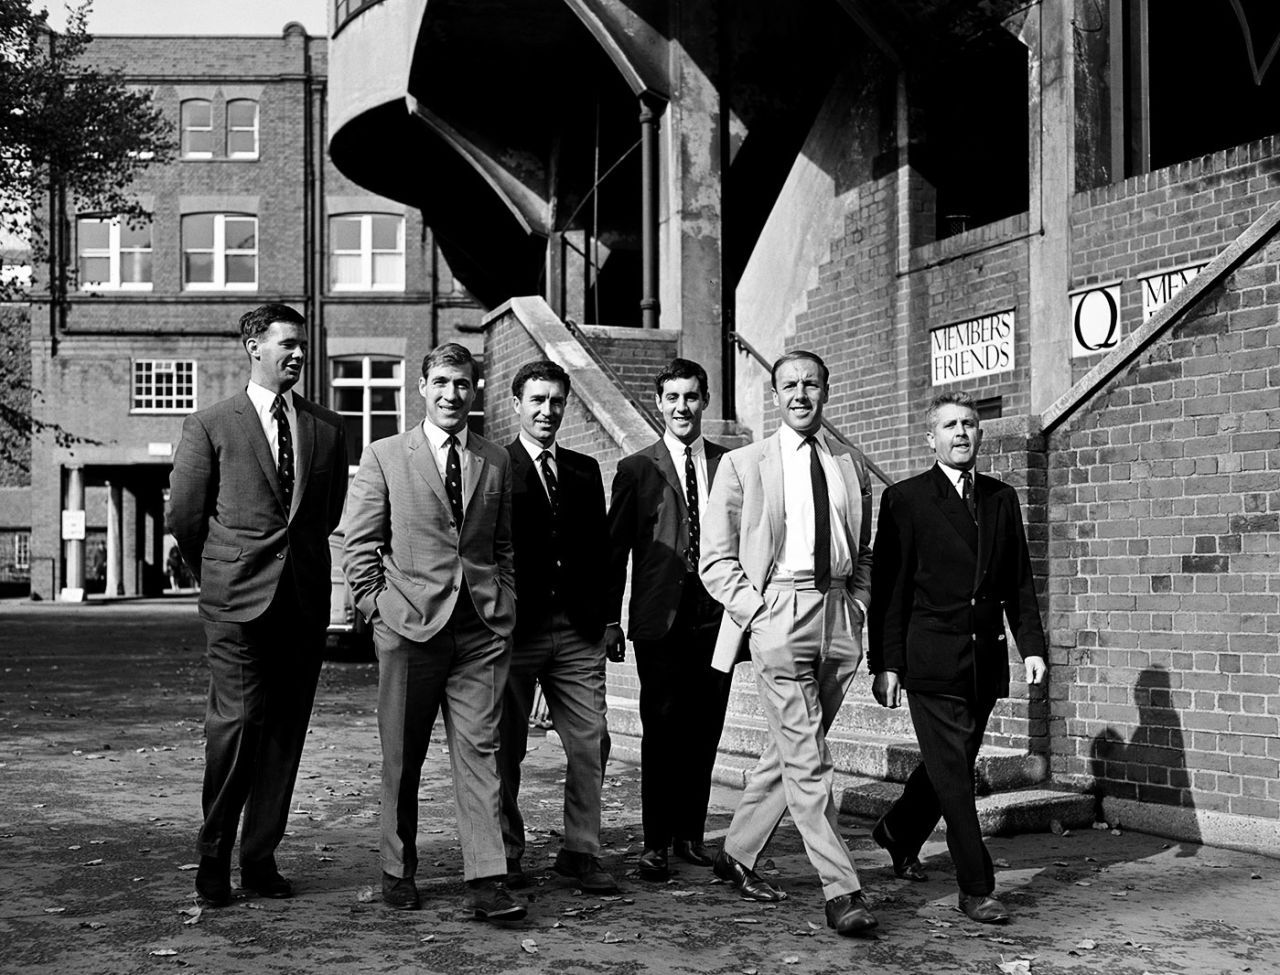 Middlesex players John Price, Peter Parfitt, Fred Titmus, Mike Brearley, John Murray and team manager R Nicholson arrive at Lord's before England depart for South Africa, October 15, 1964